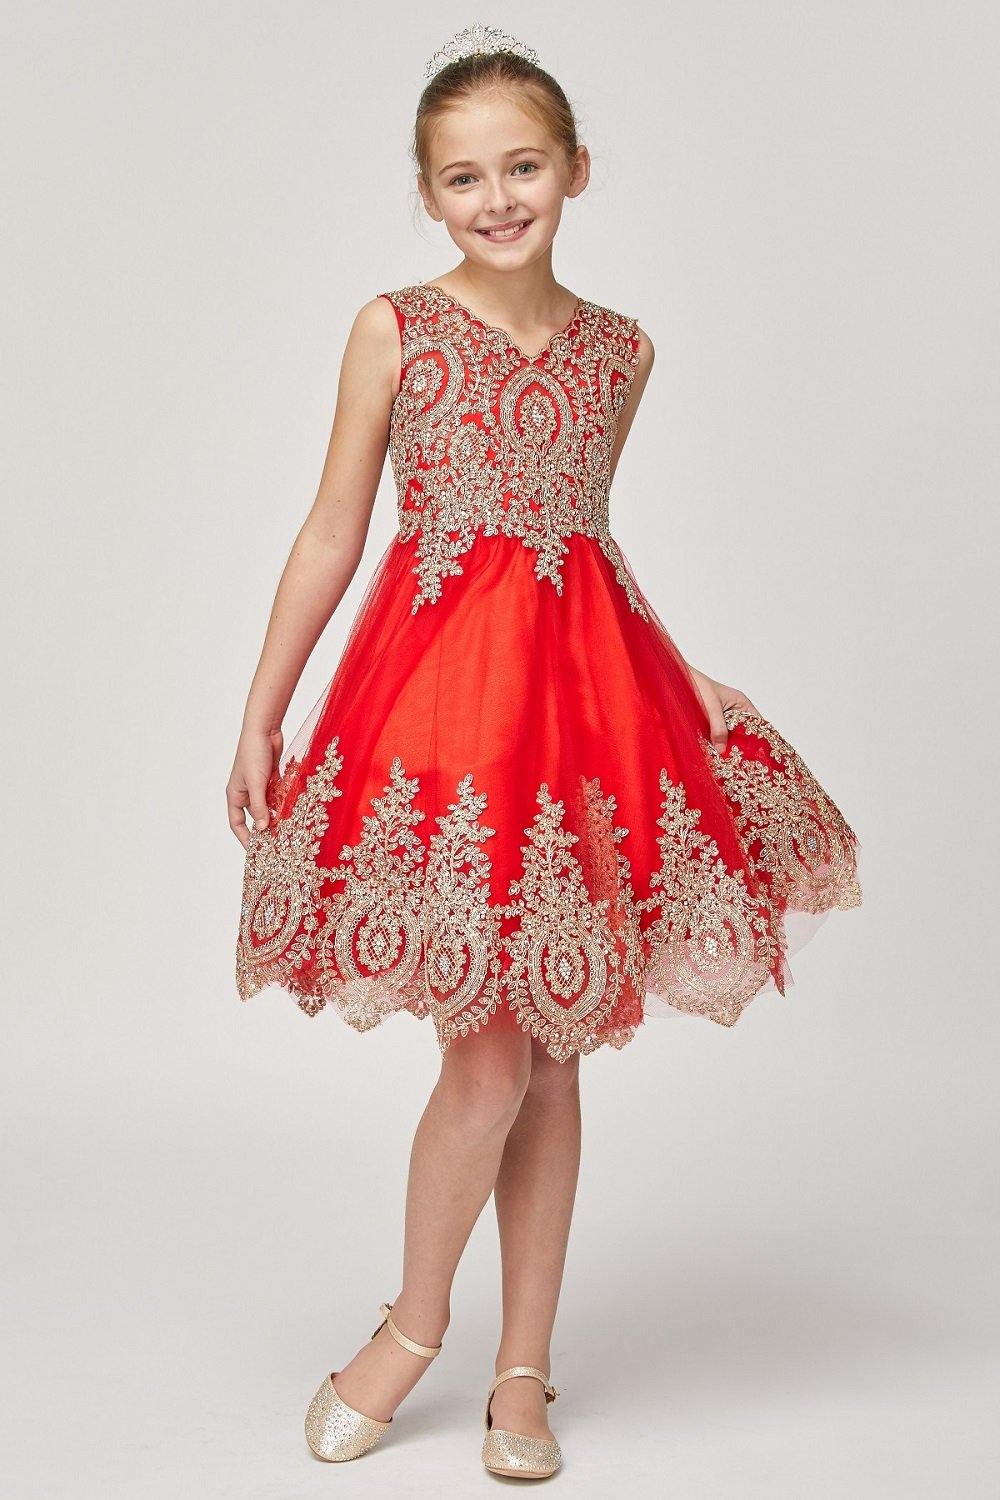 Sleeveless Gold Embellished Short Party Flower Girl Dress - The Dress Outlet Cinderella Couture